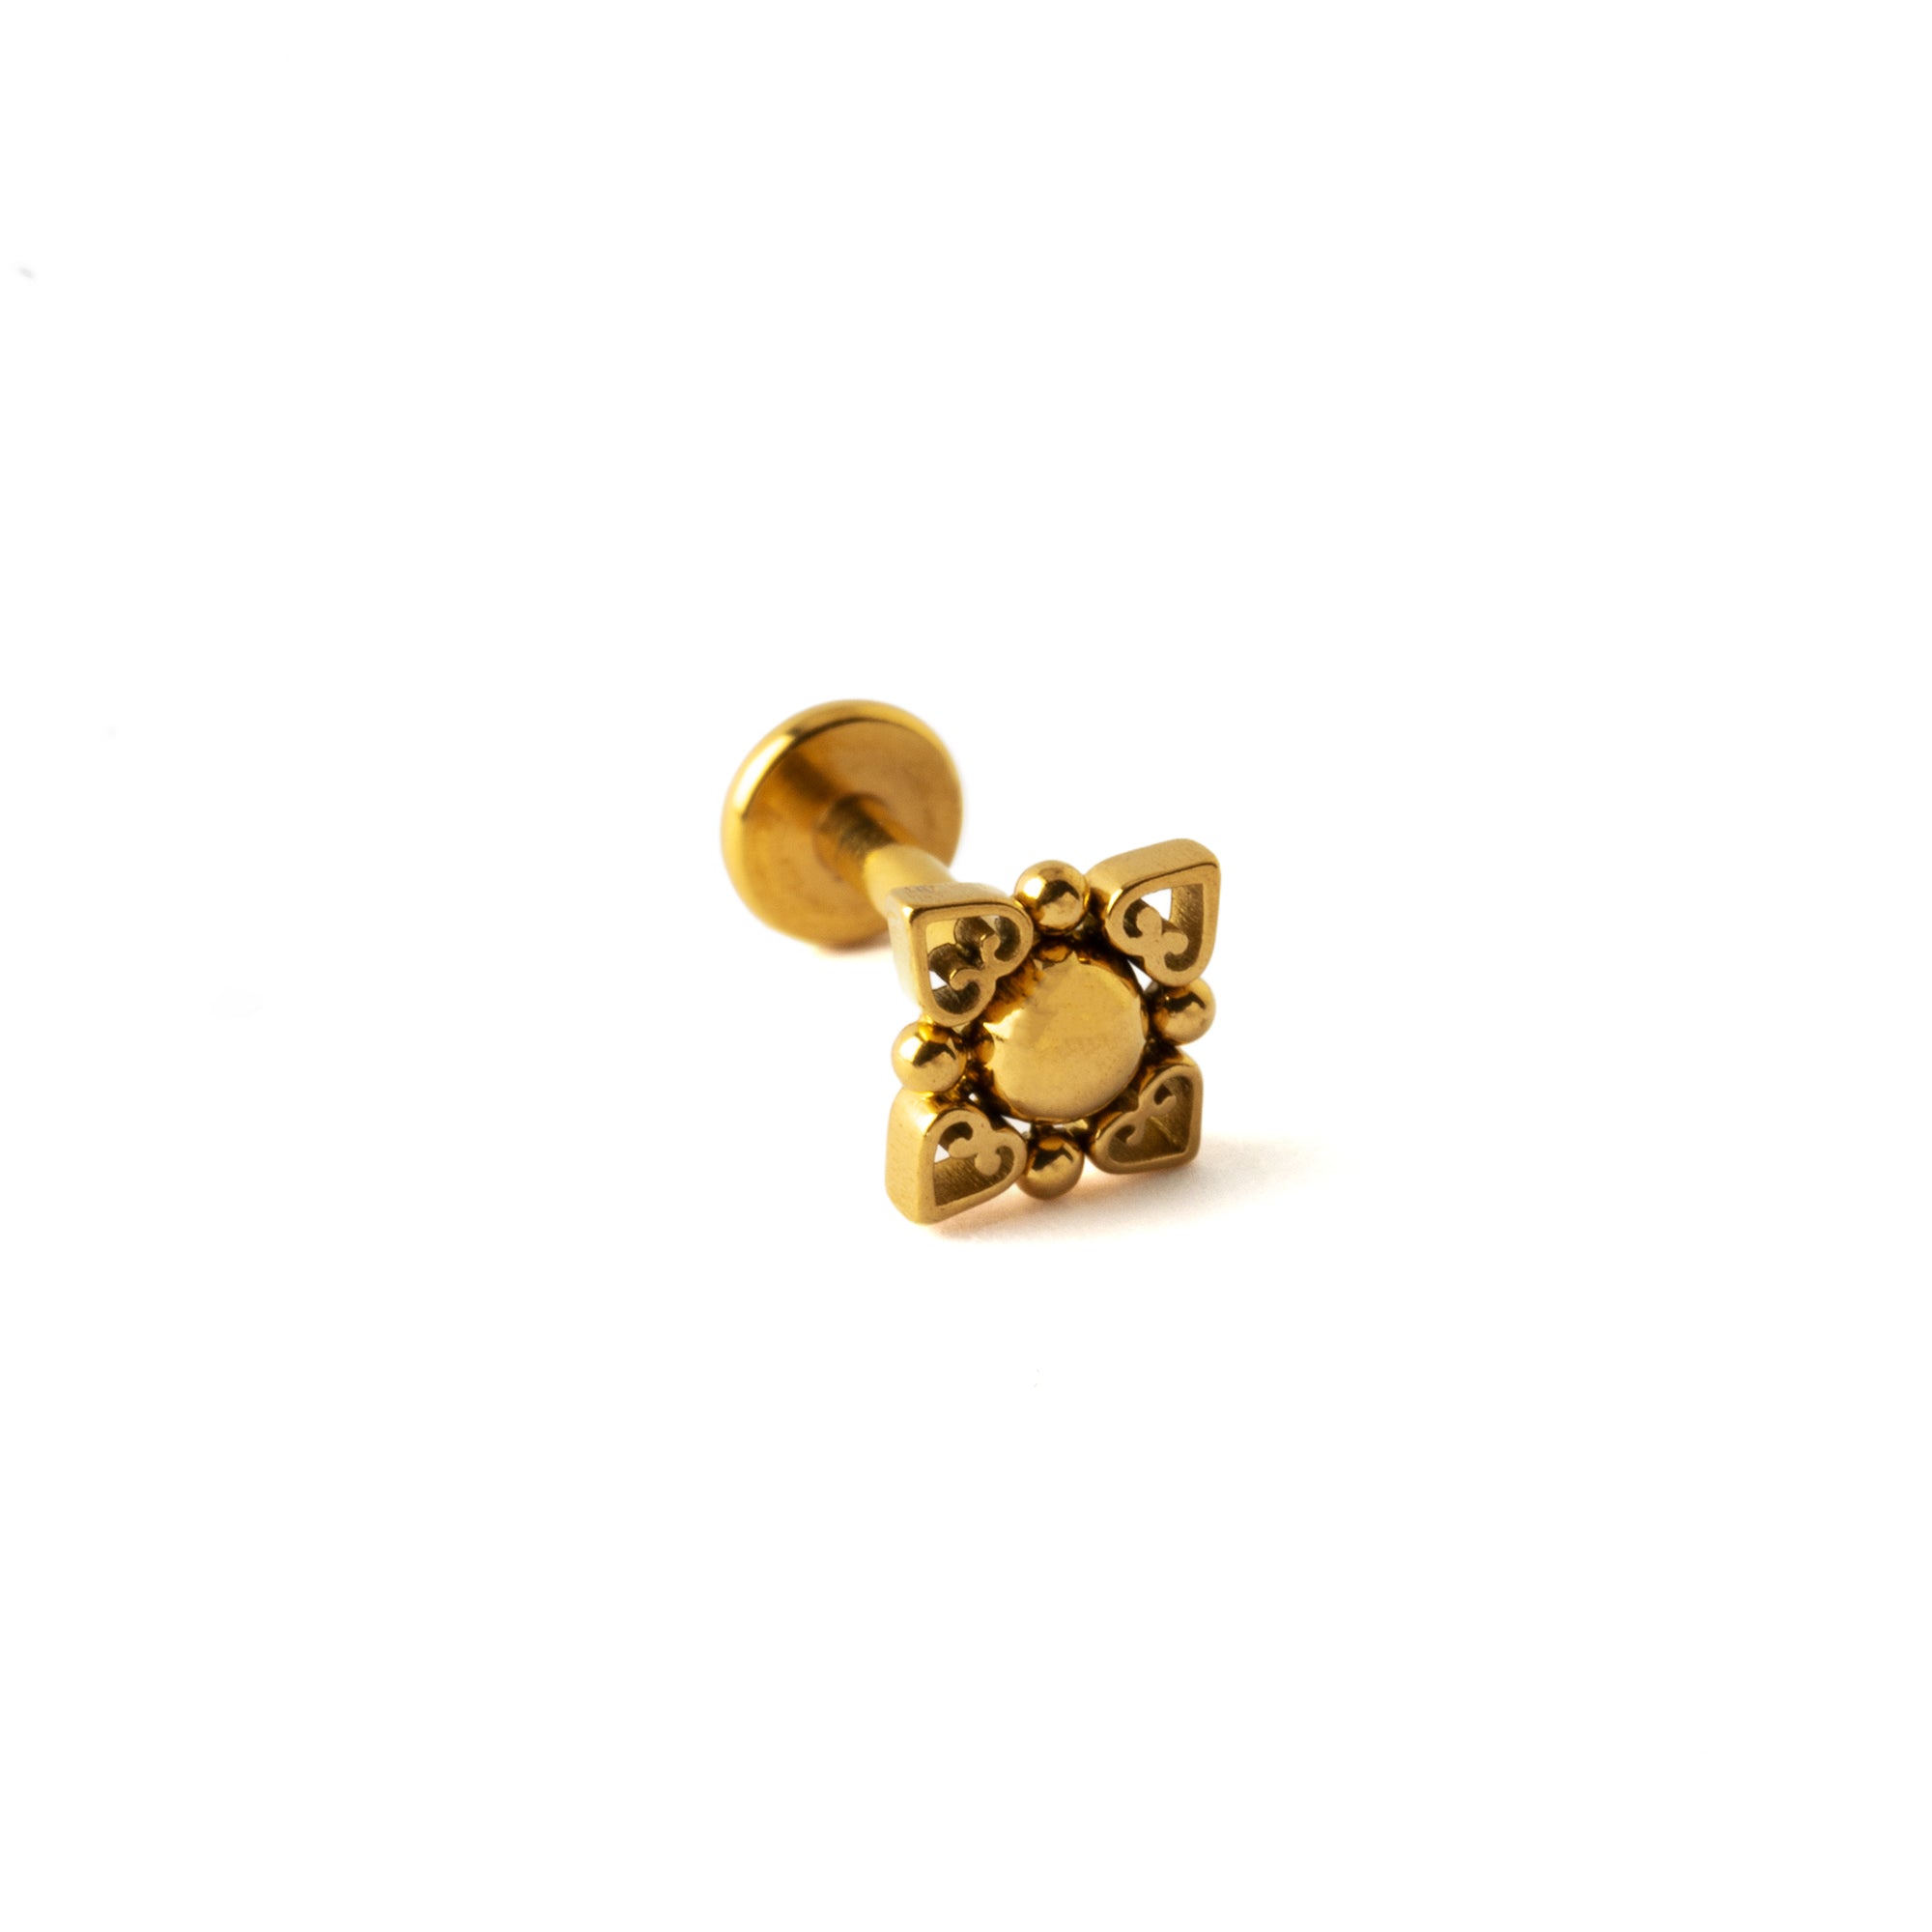 Neptune Gold surgical steel internally threaded Labret stud right side view